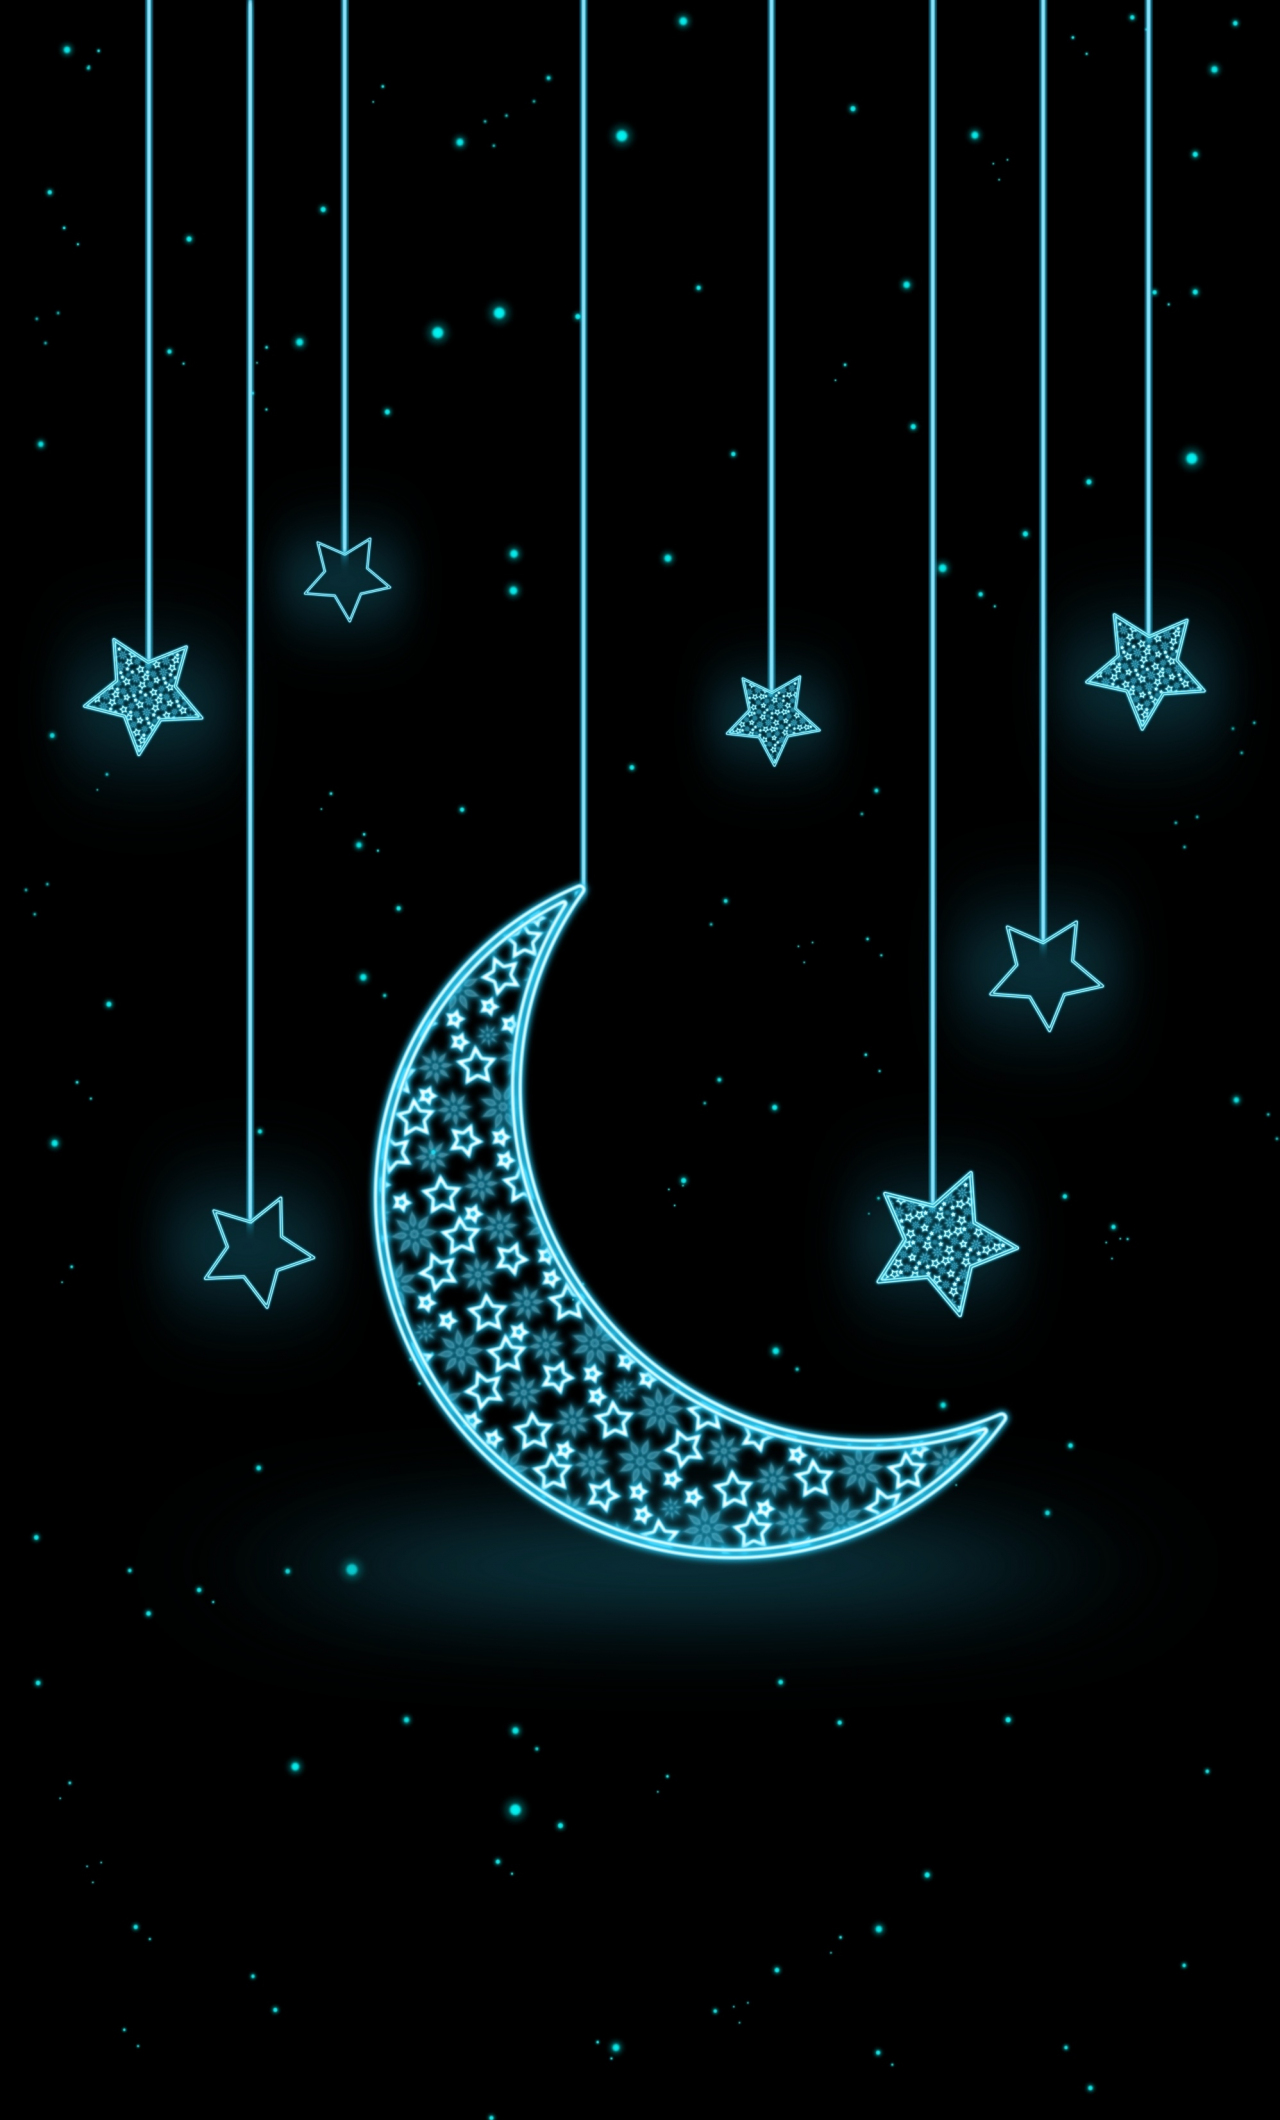 moon and stars iphone wallpaper